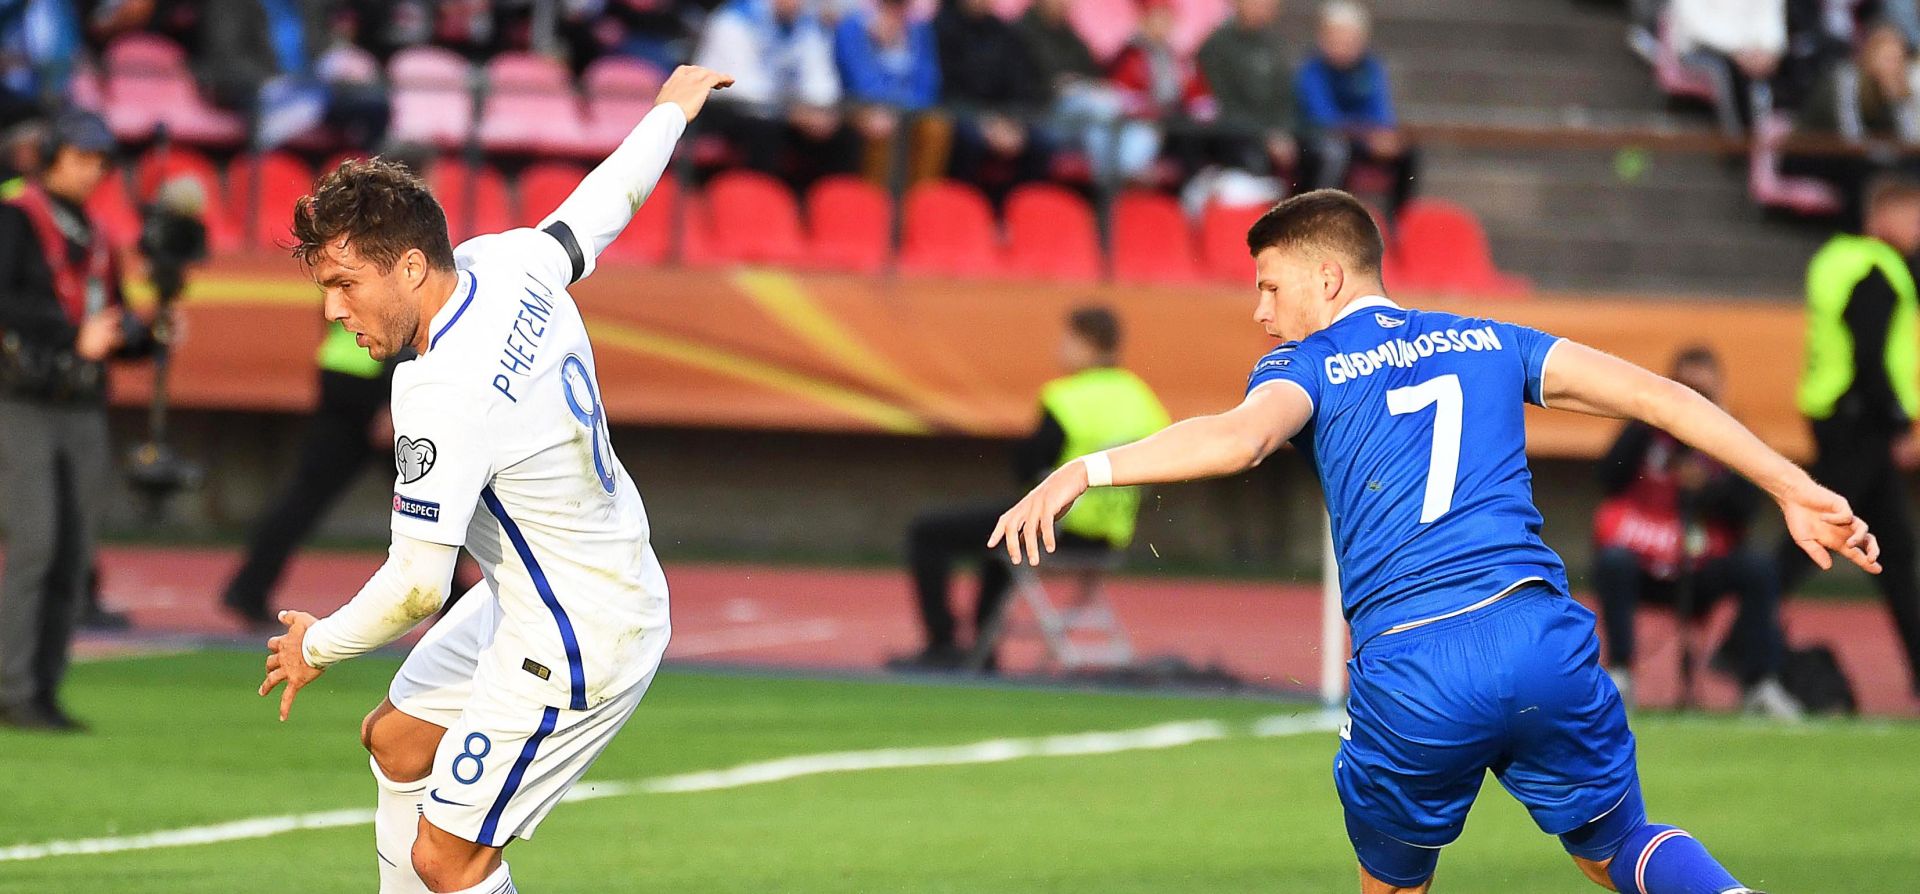 epa06179408 Perparim Hetemaj (L) of Finland in action against Johann Gudmundsson (R) of Iceland during the FIFA World Cup 2018 qualifying soccer match between Finland and Iceland in Tampere, Finland, 02 September 2017.  EPA/KIMMO BRANDT